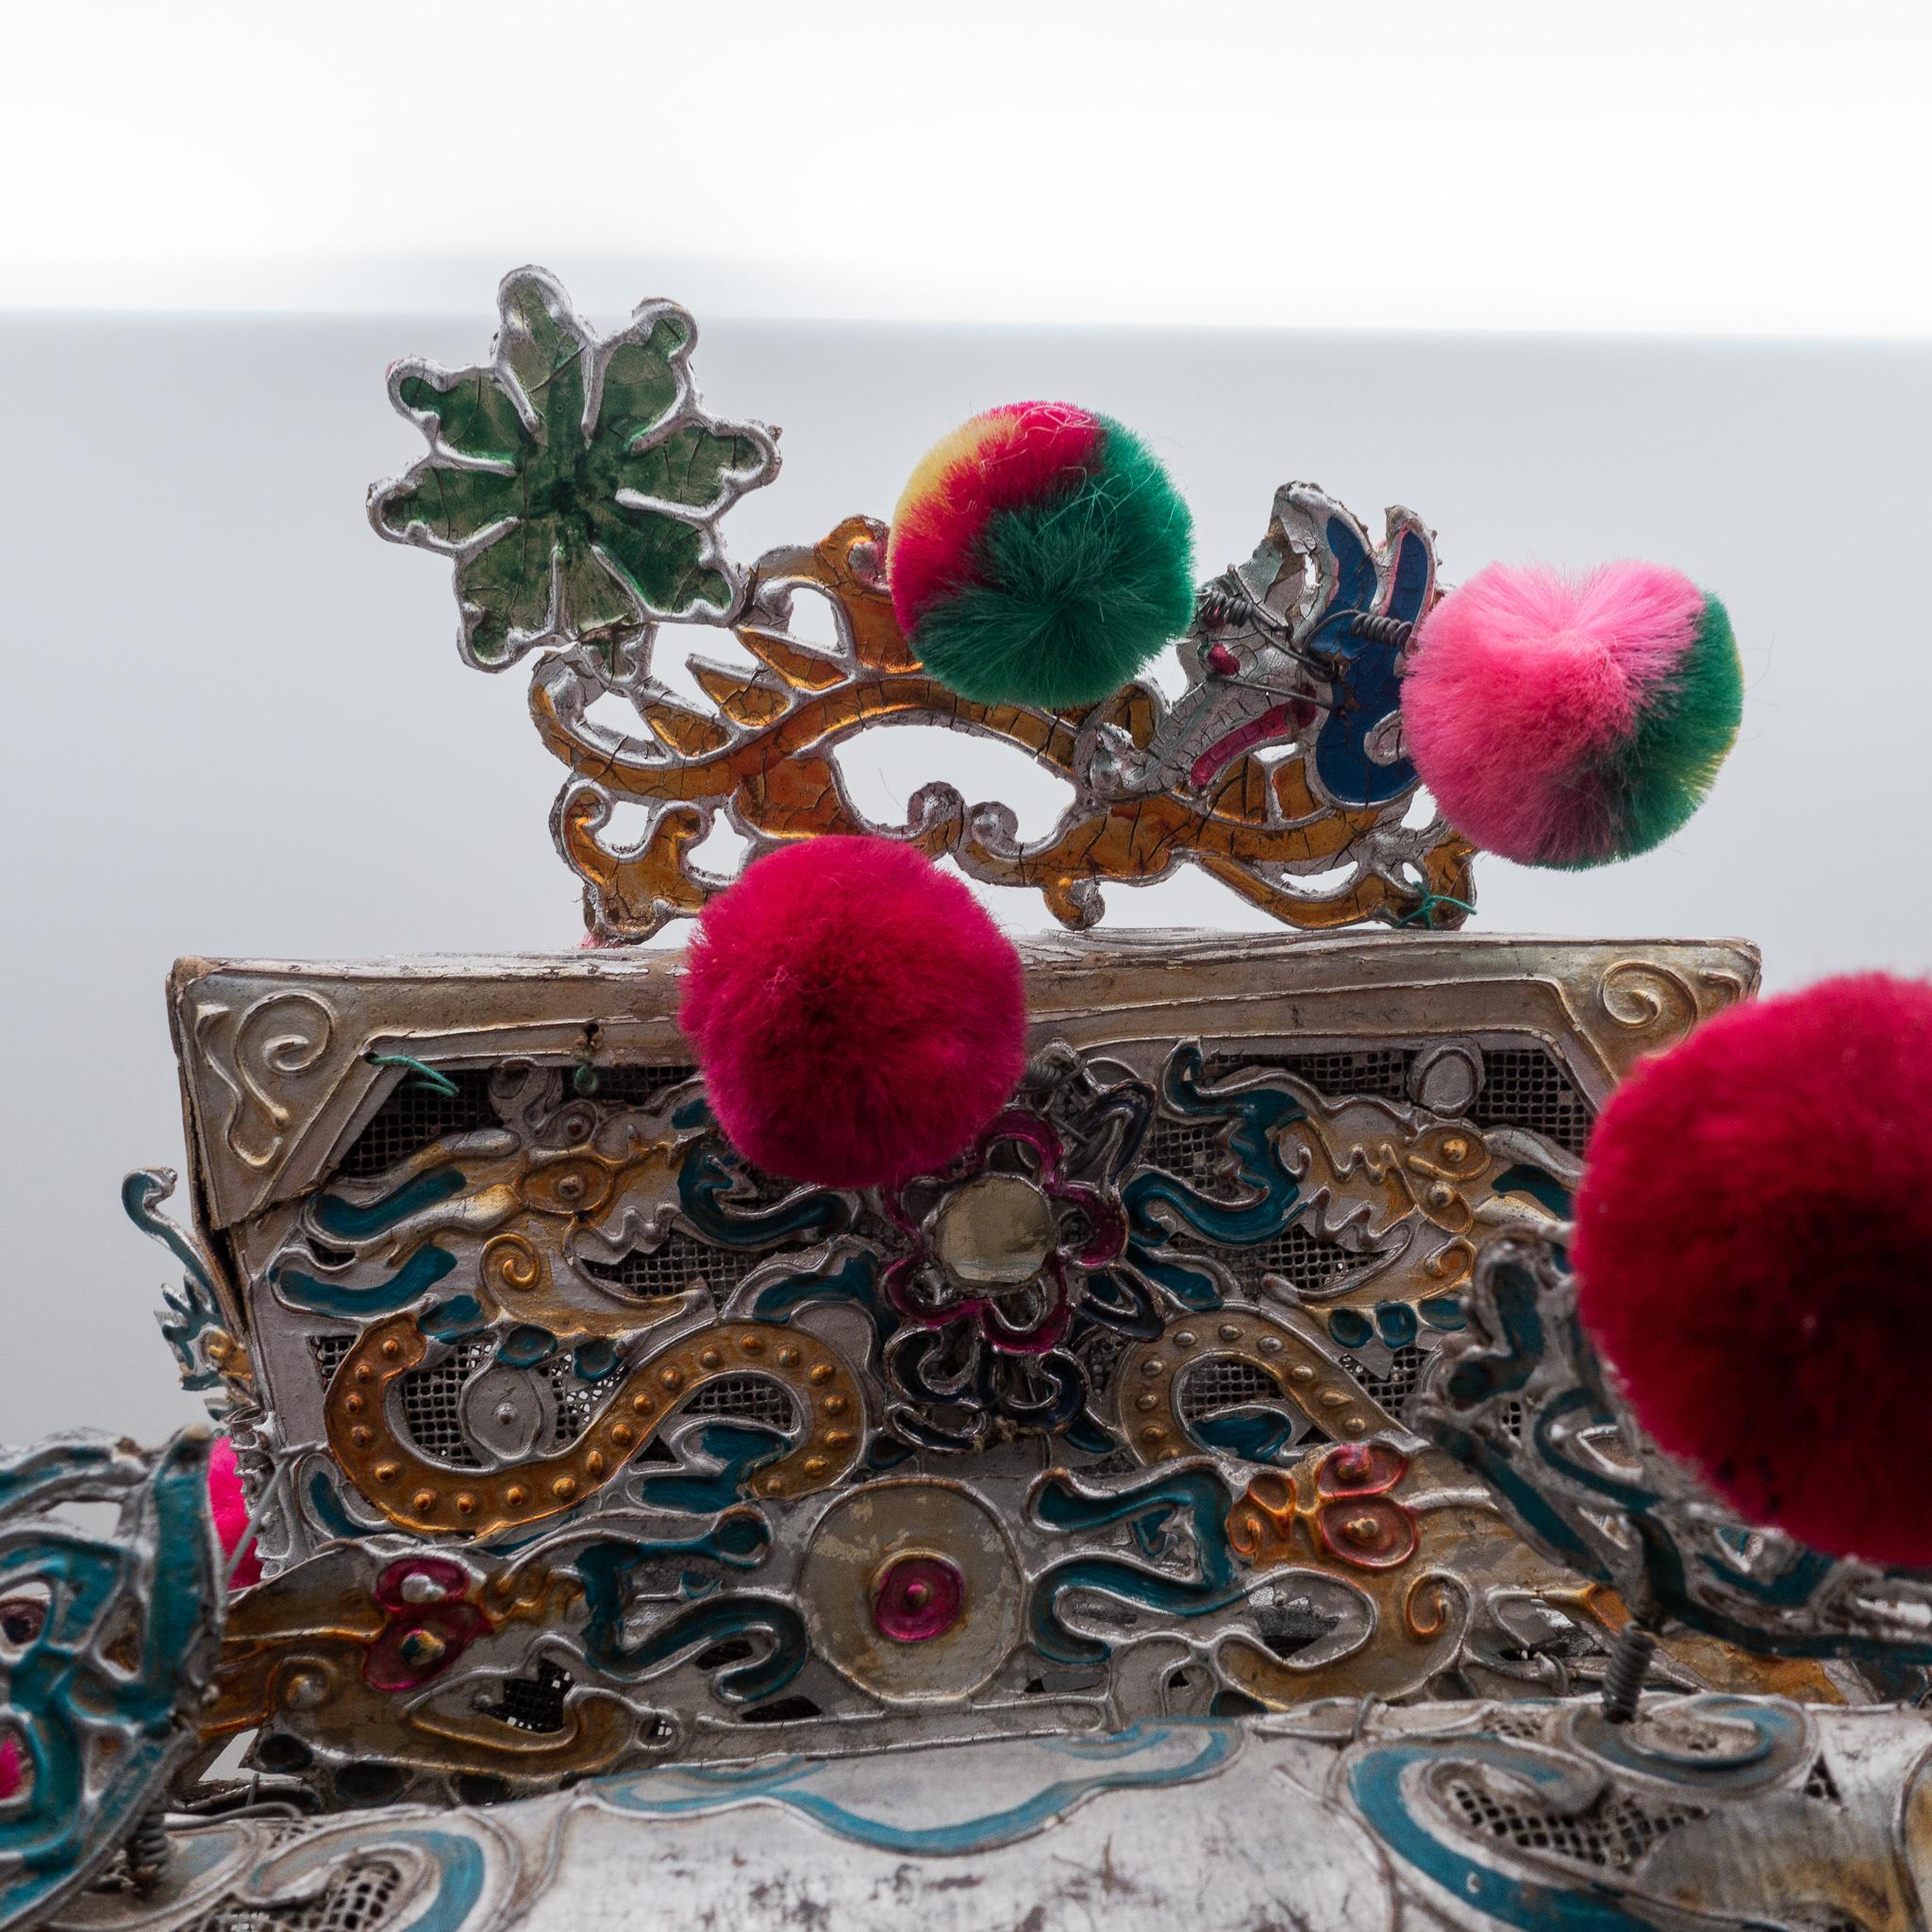 Vintage Chinese Theatre Opera Headdress, Silver/Turquoise, Rubine Red Pom-Poms In Good Condition For Sale In New York, NY